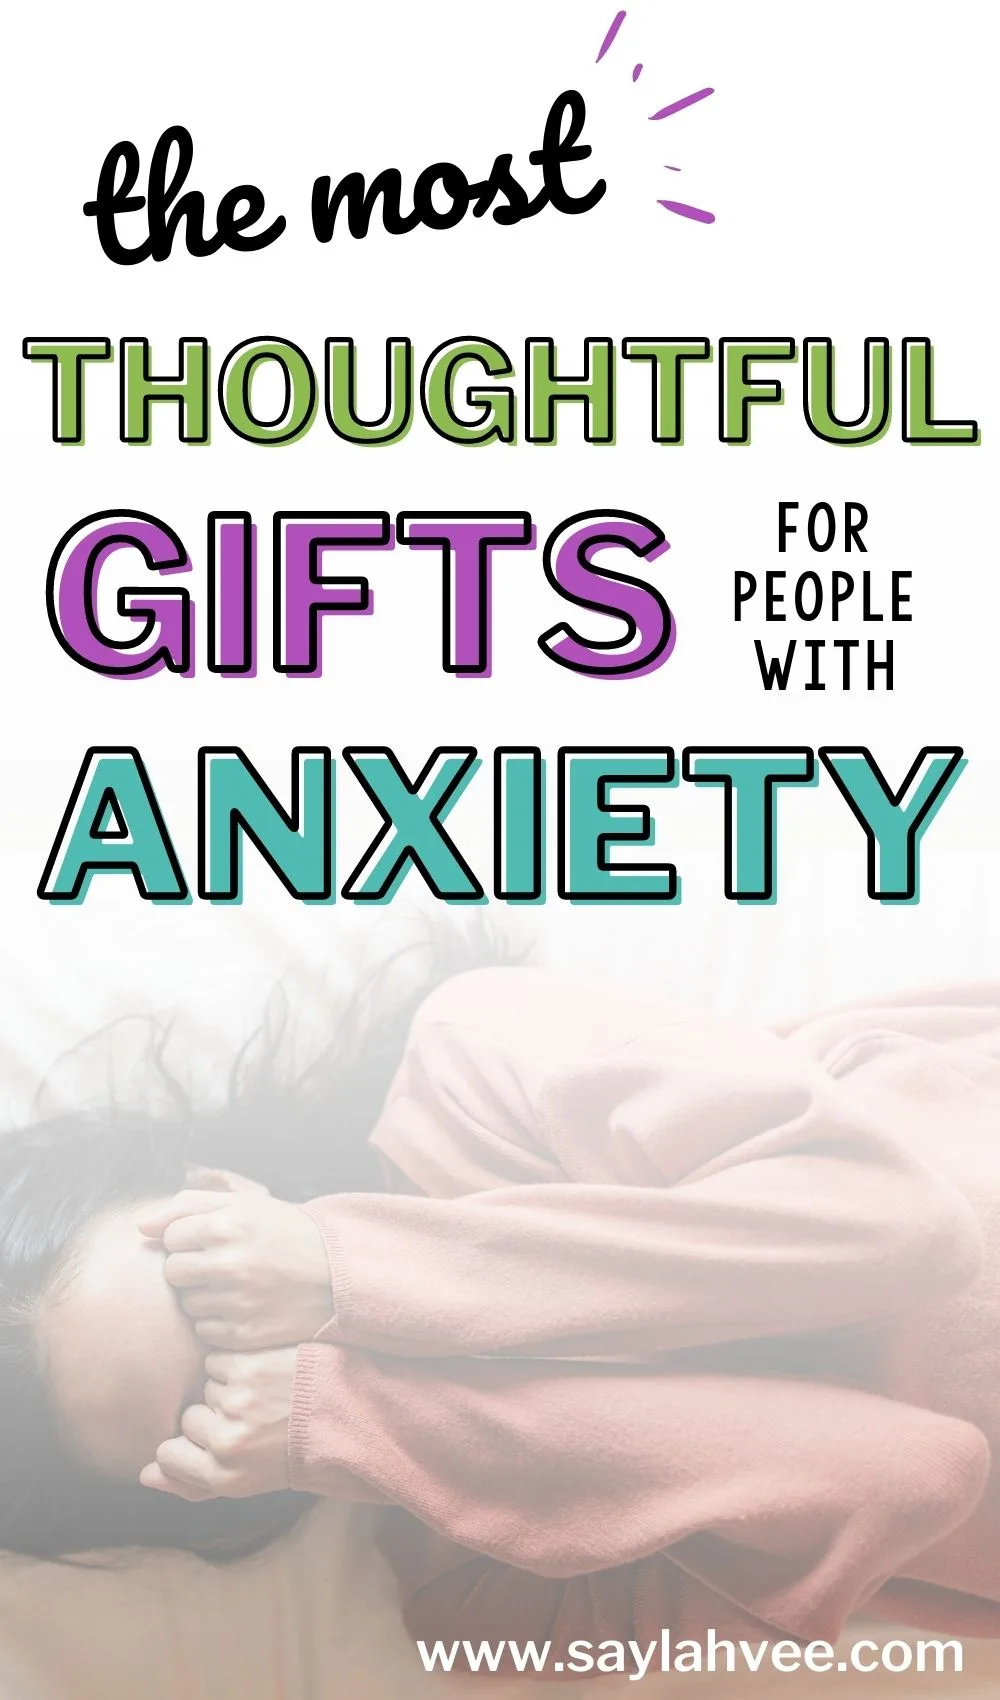 45 Mind-Easing Gift Ideas for People with Anxiety